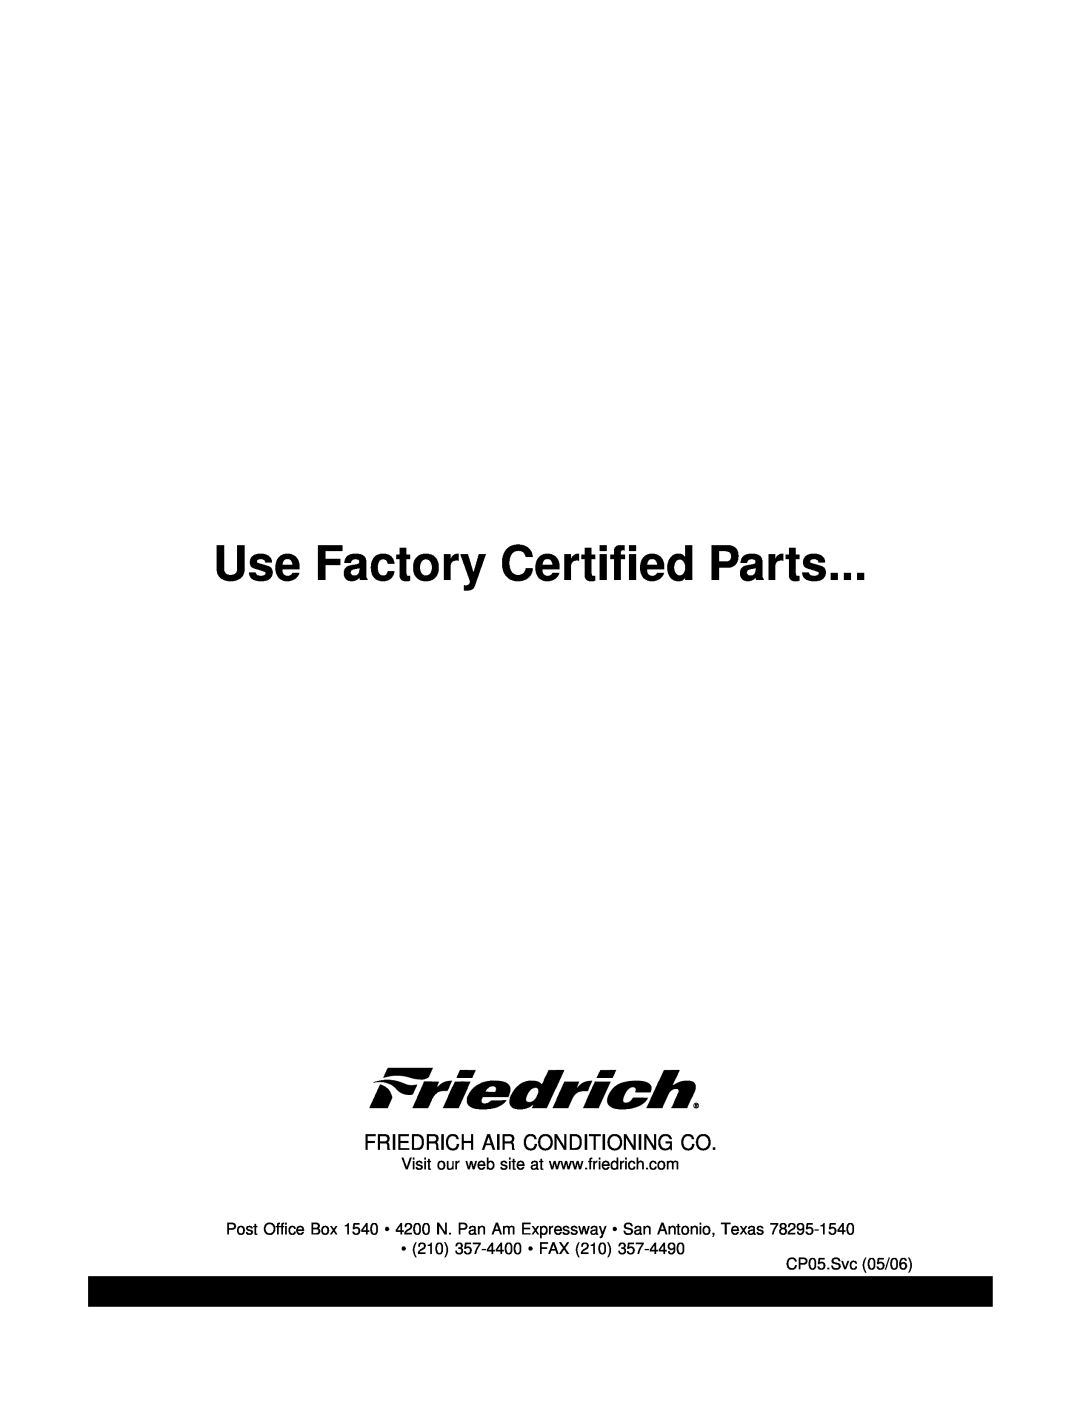 Friedrich CP05C10 manual Use Factory Certified Parts, Friedrich Air Conditioning Co 